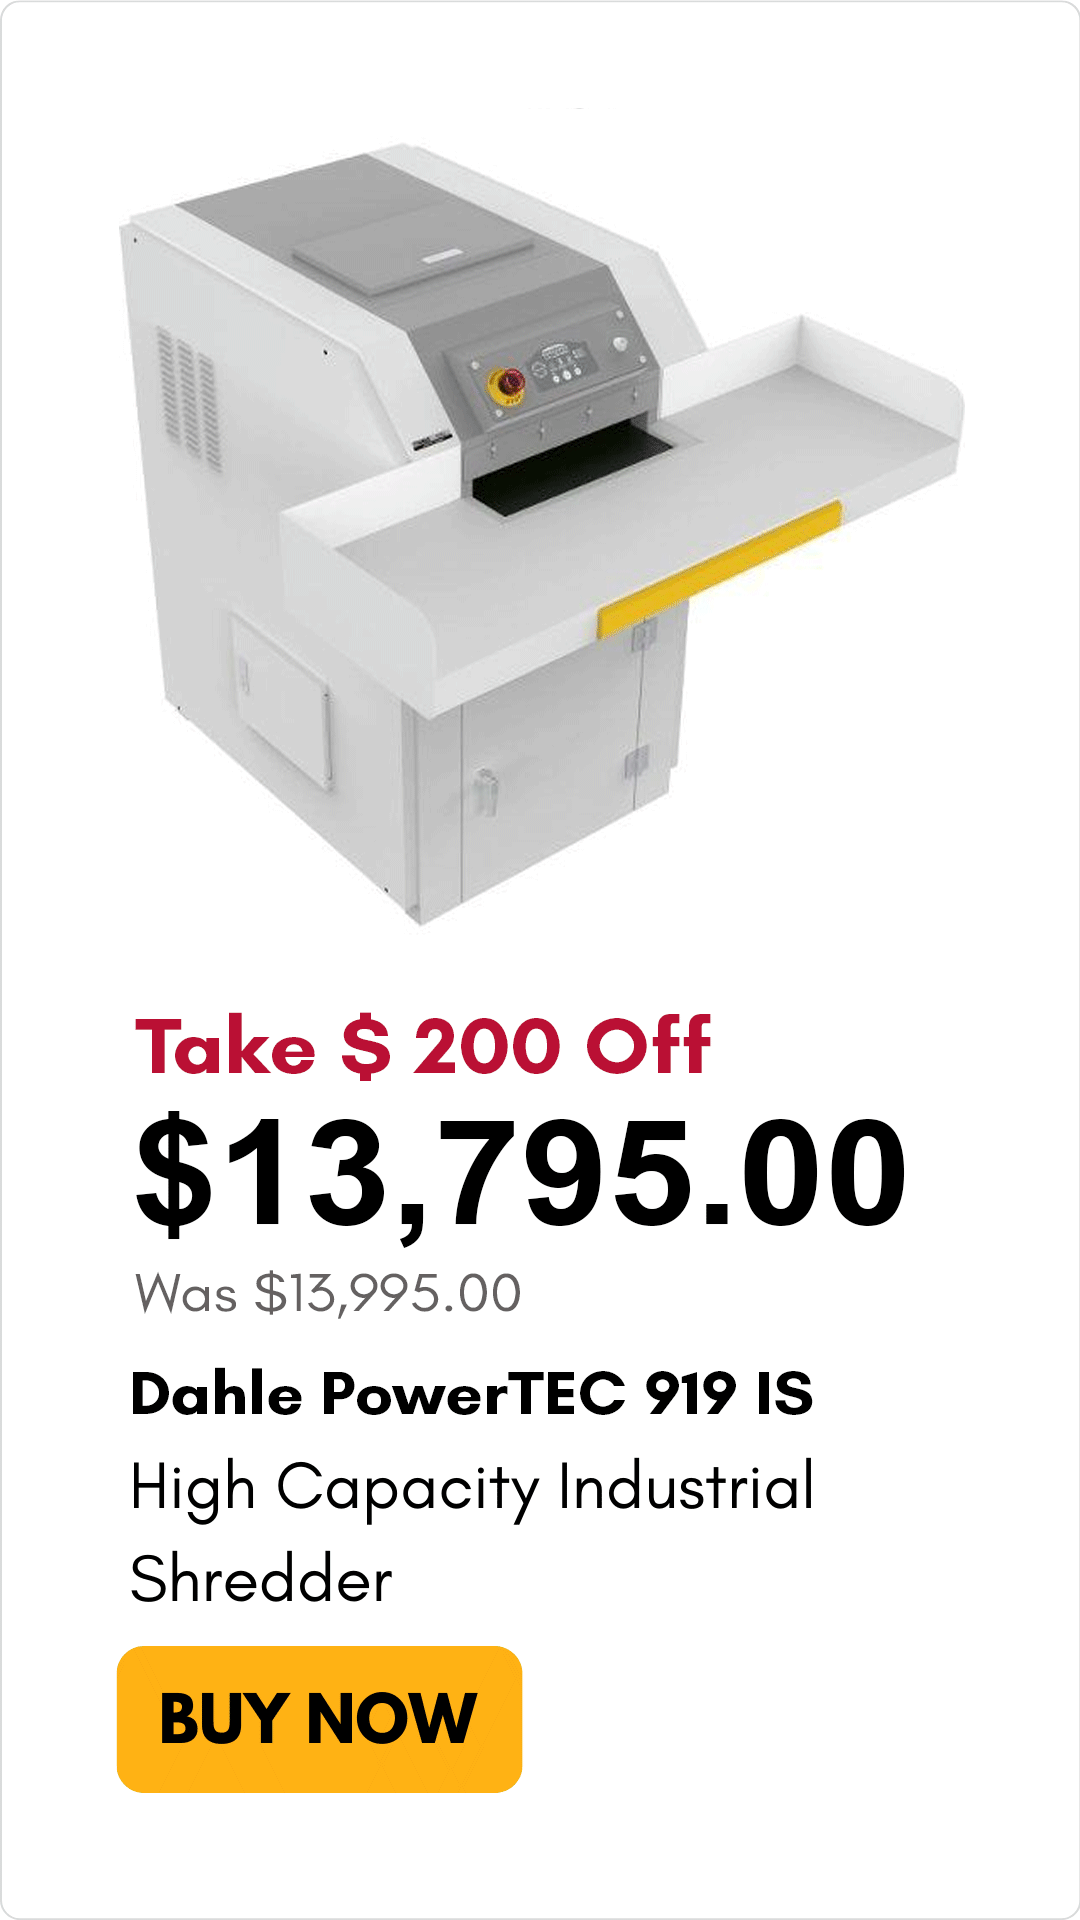 Dahle PowerTEC 919 IS  on sale for $200 off